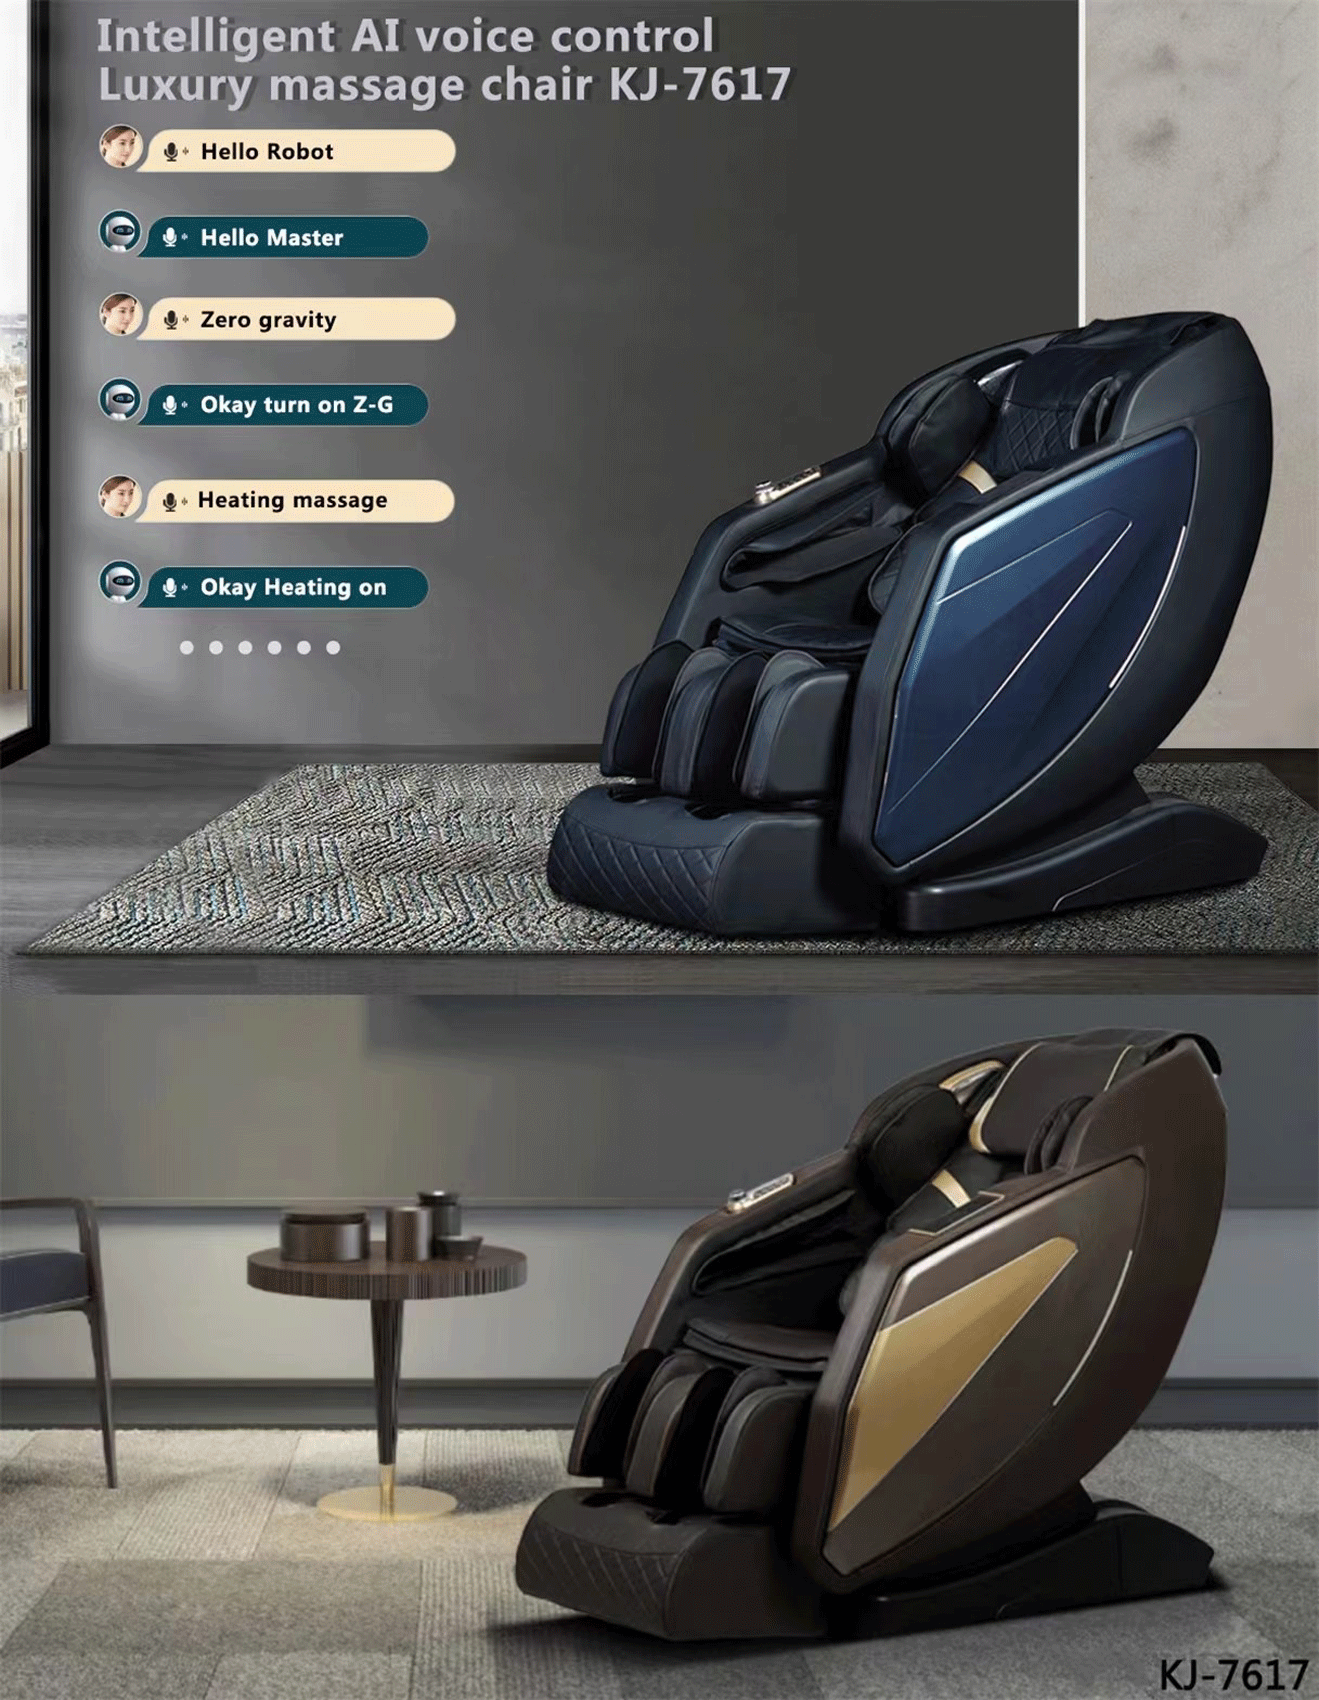 Living Room Furniture Reclining and Sliding Seats Sets KJ-7617 Intelligent AI voice control Massage Chair